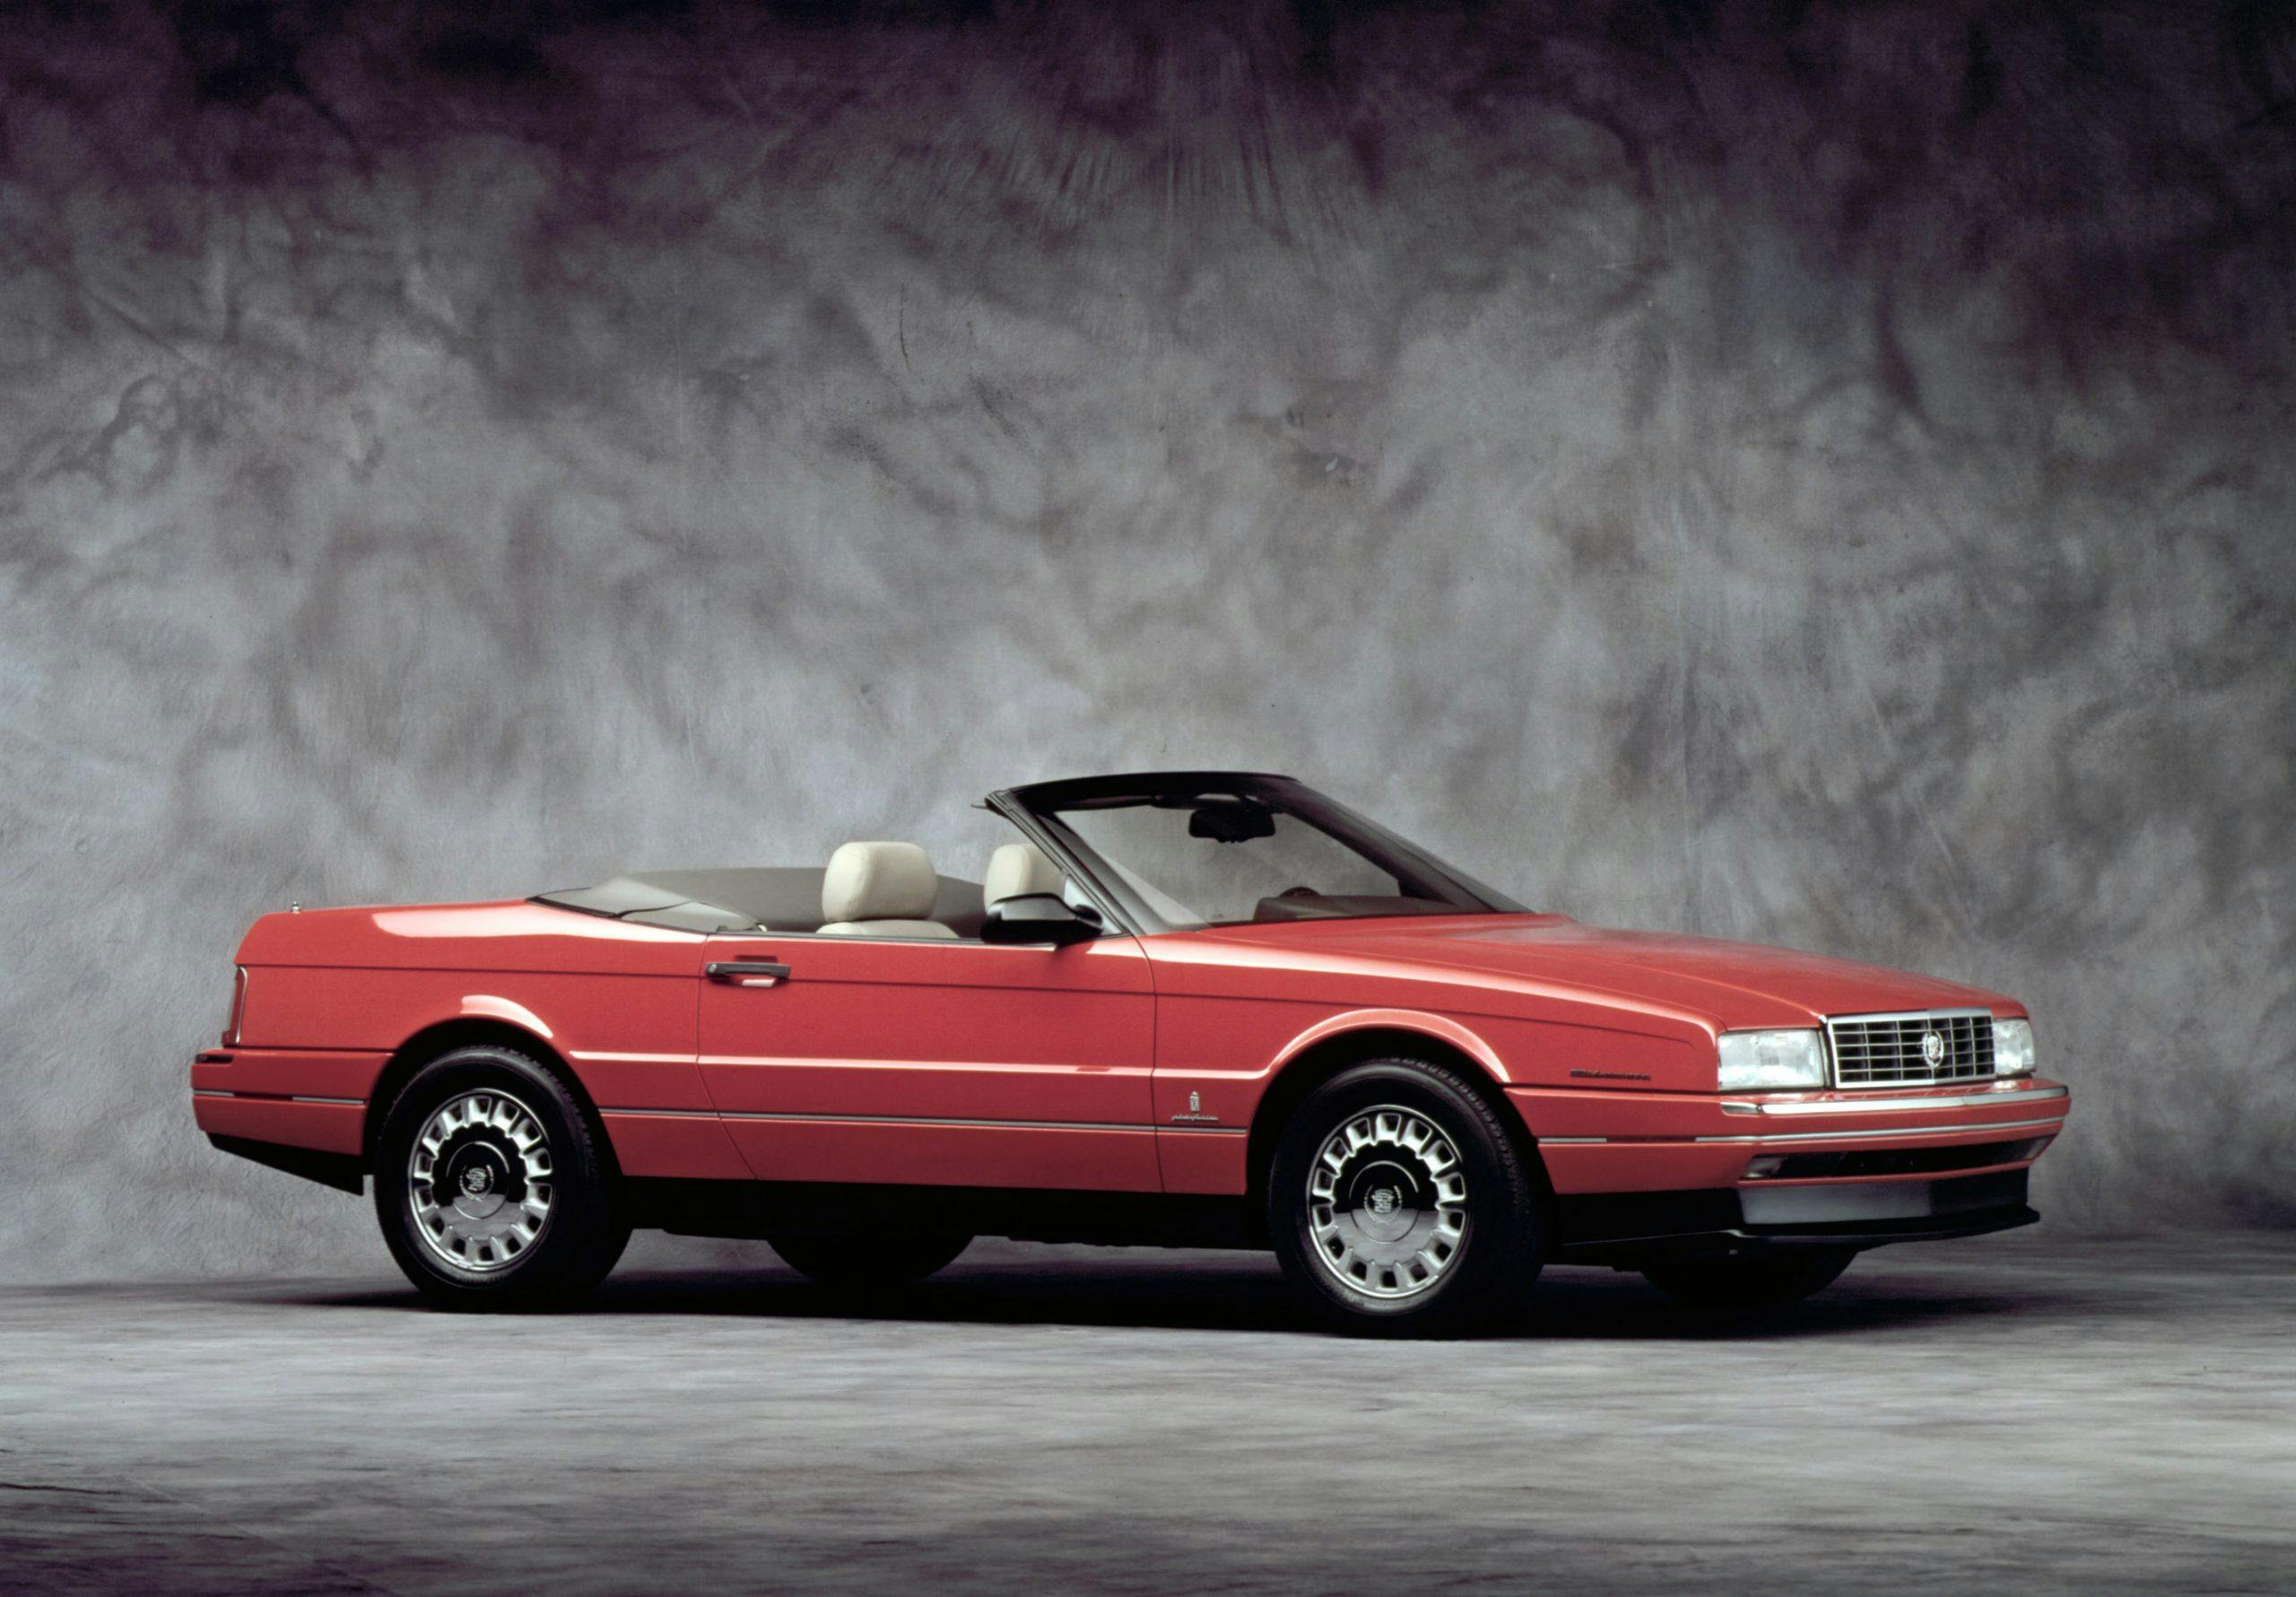 https://hagerty-media-prod.imgix.net/2020/06/1990-Cadillac-Allante-scaled.jpg?auto=format%2Ccompress&fit=crop&ixlib=php-3.3.0&max-h=445&max-w=640